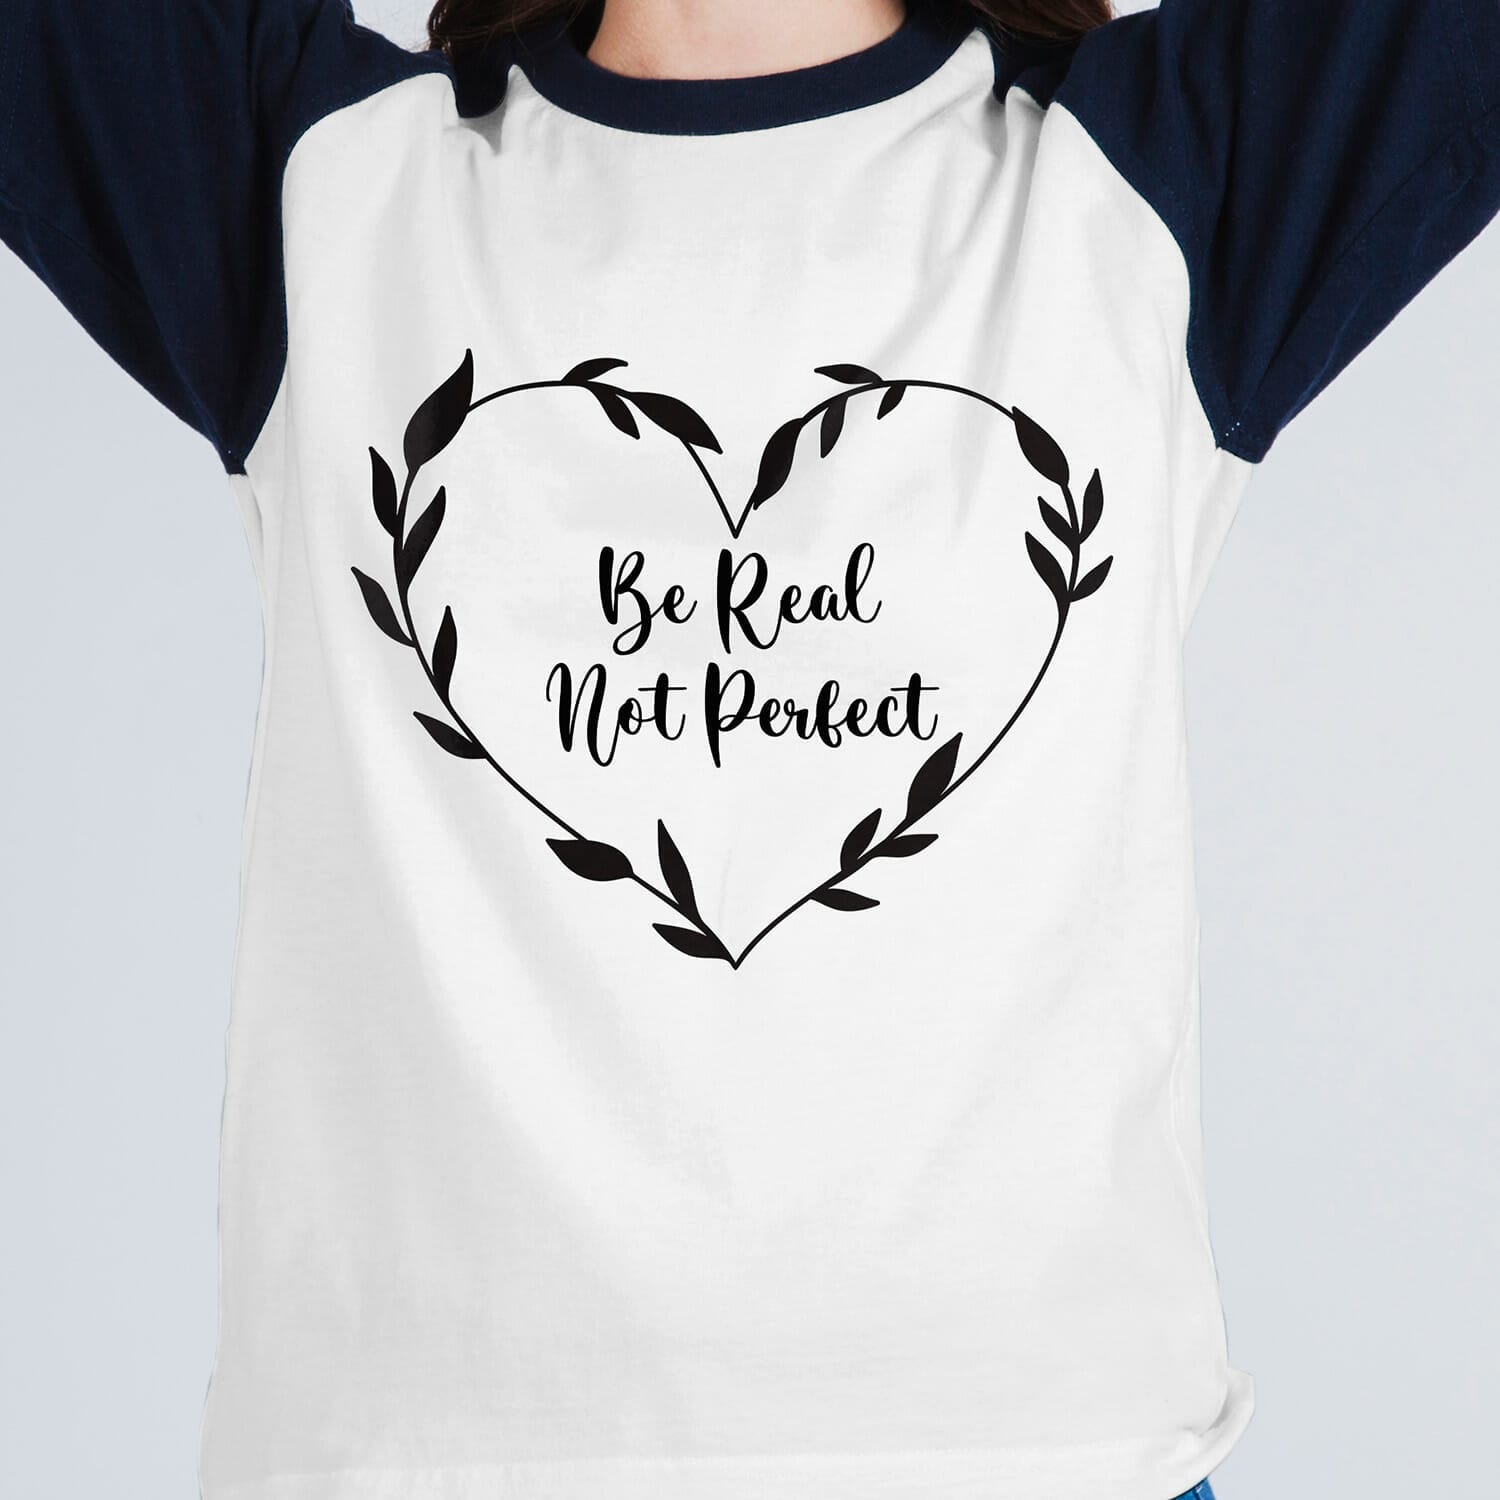 Be real not perfect Heart Shaped Tshirt design